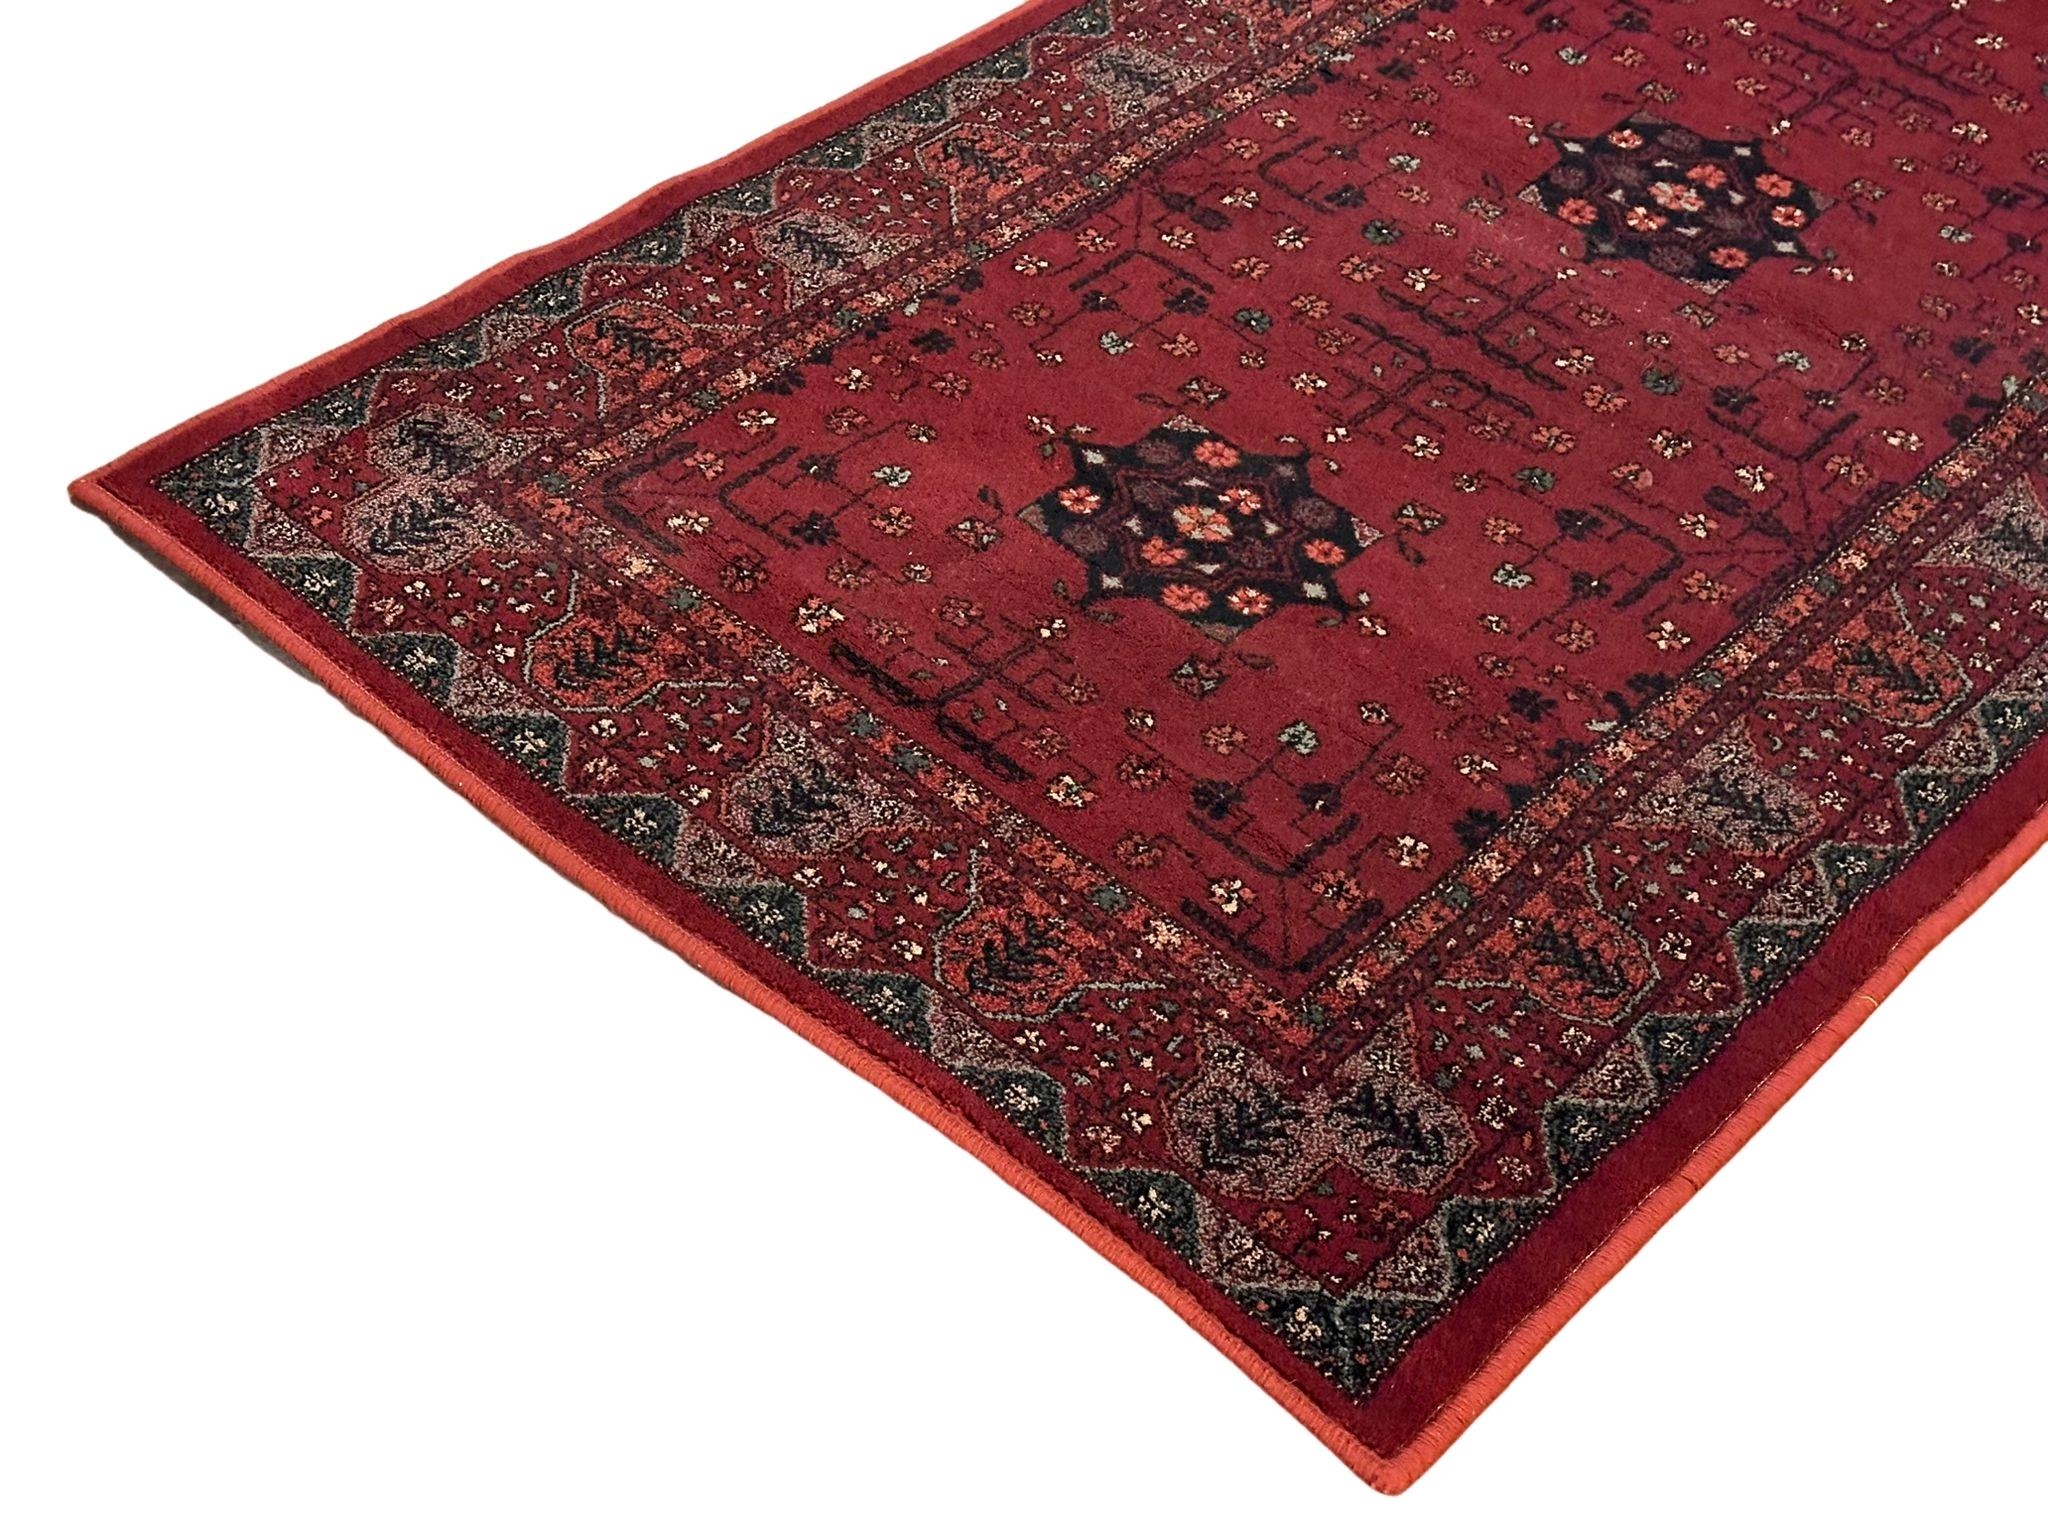 A Middle Eastern style rug. 80x160cm - Image 4 of 4